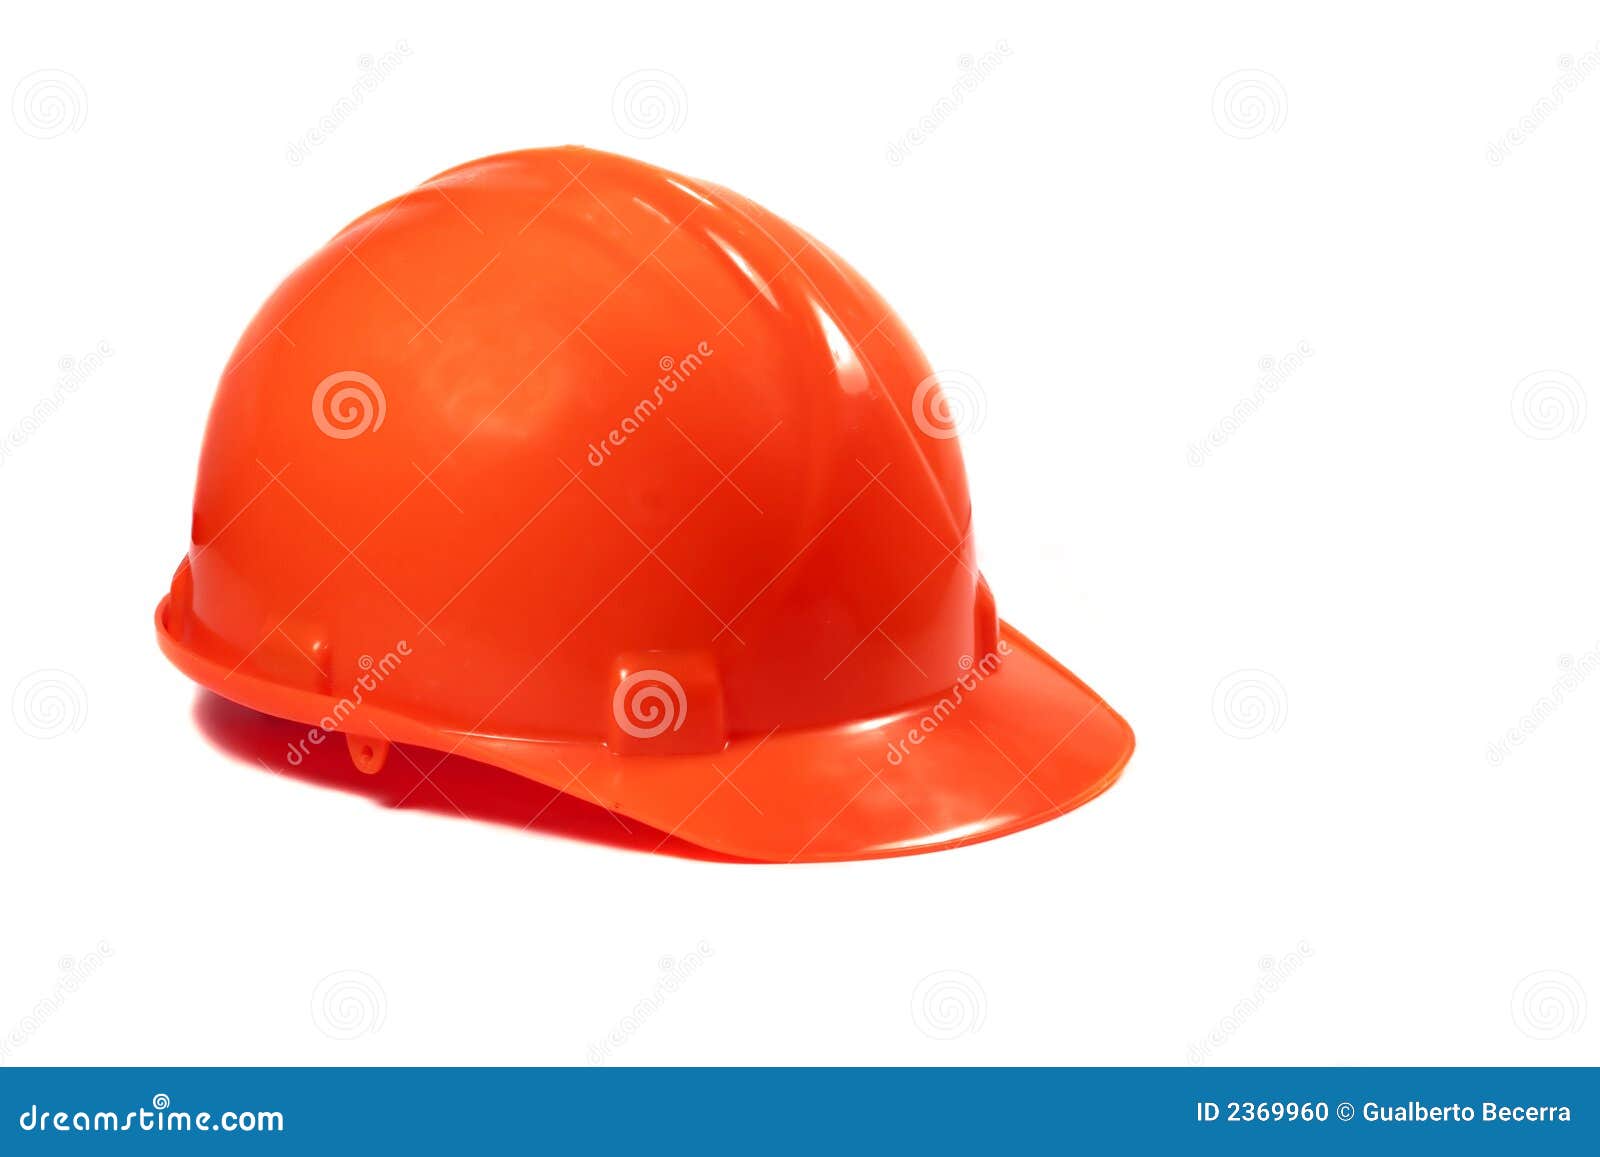 red hard hat clipart - photo #24